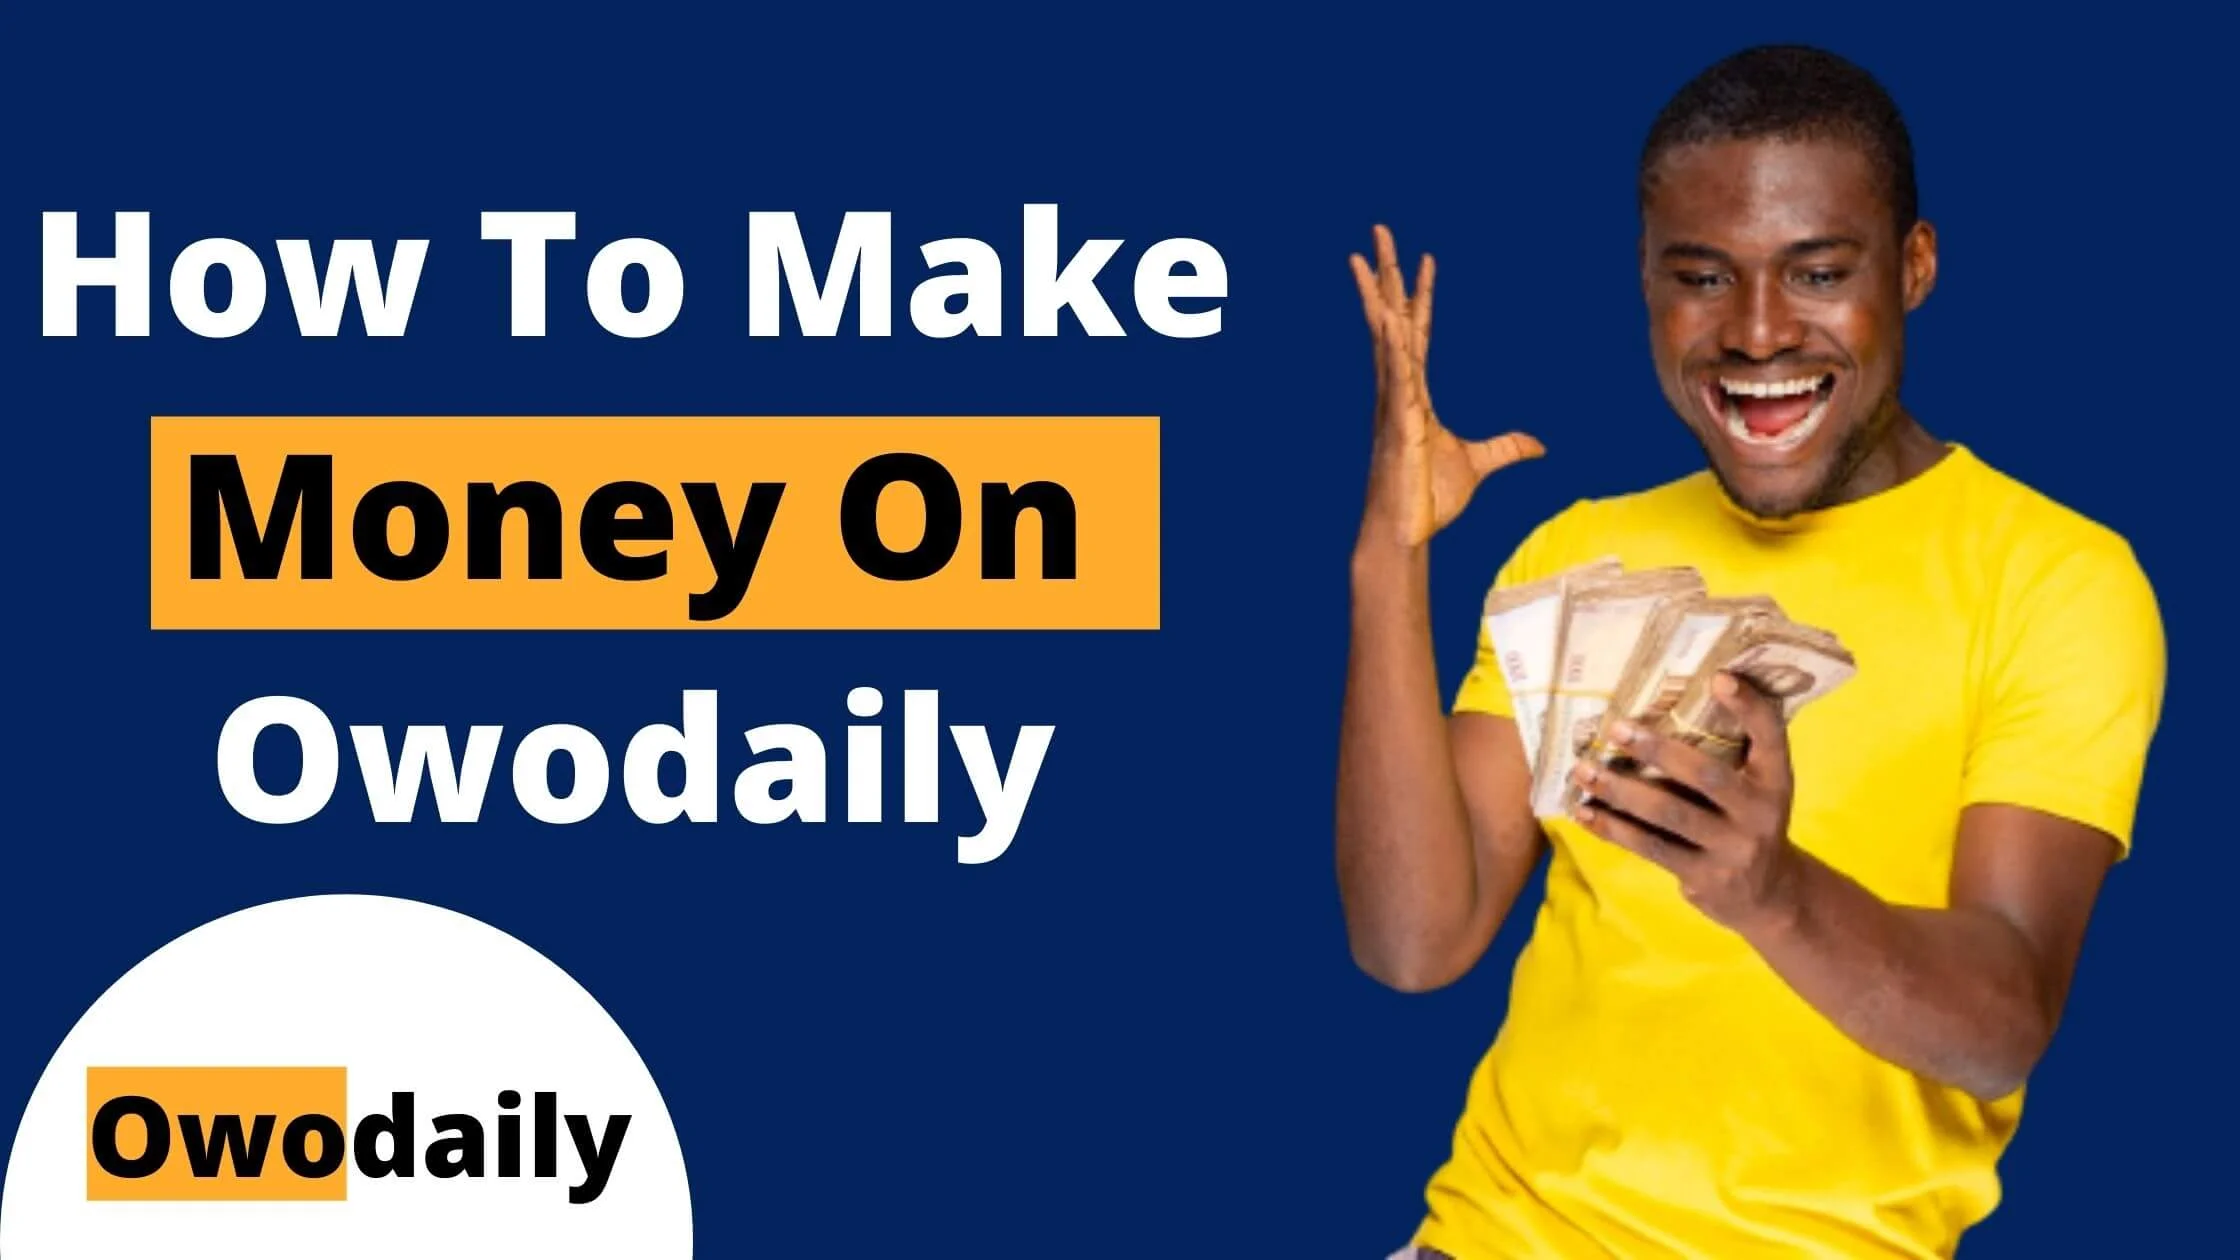 How To Make Money On Owodaily